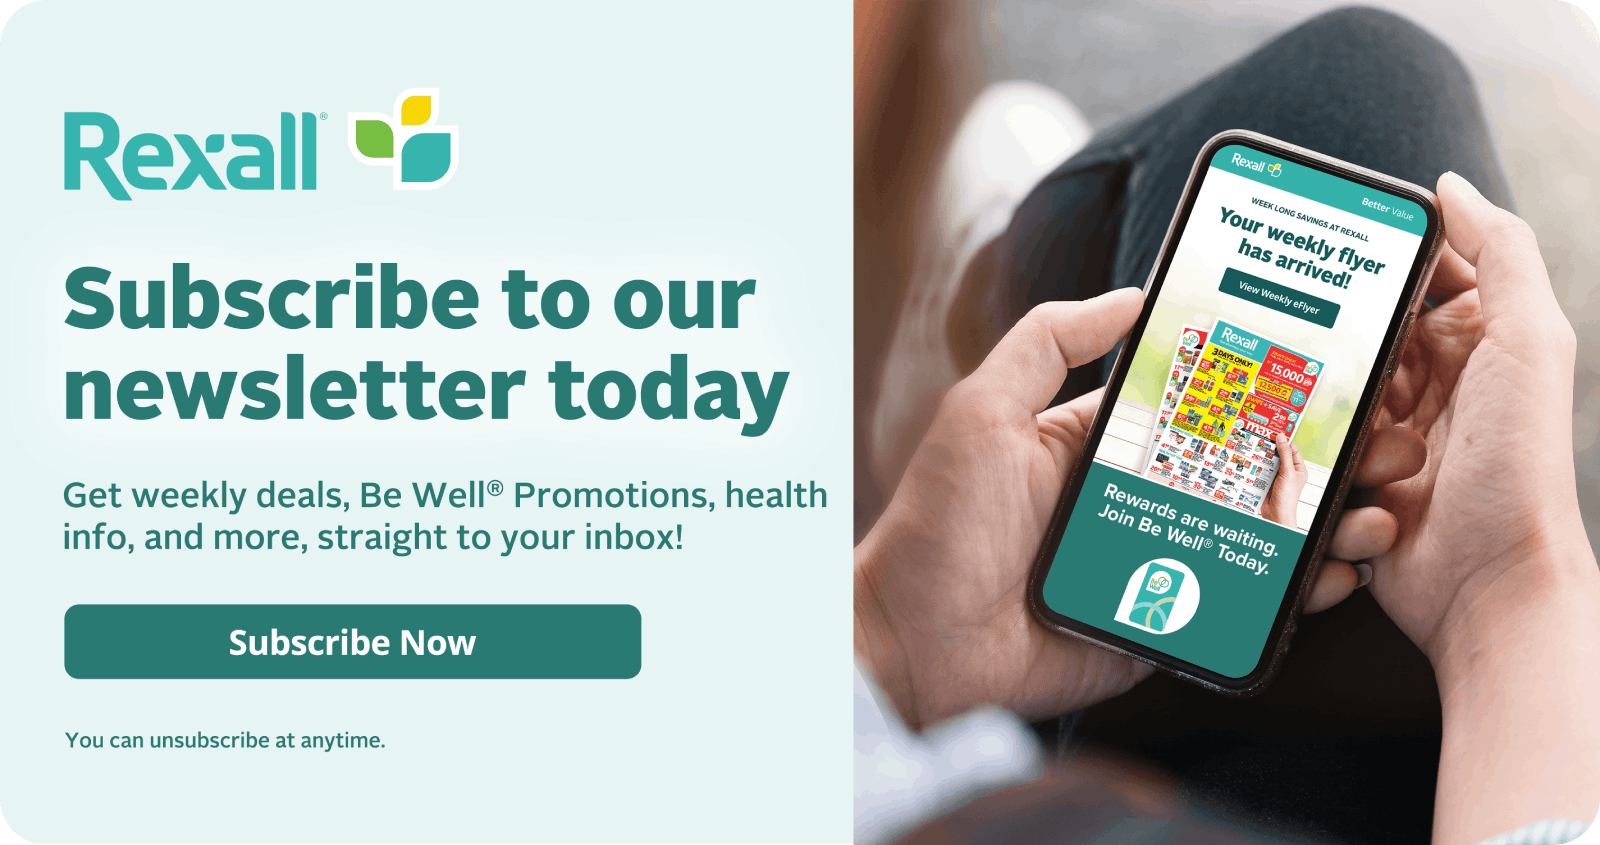 Subscribe to our newsletter. Get weekly deals, Be Well Promotions, health info, and more, straight to your inbox! Subscribe now. You can unsubscribe at anytime.